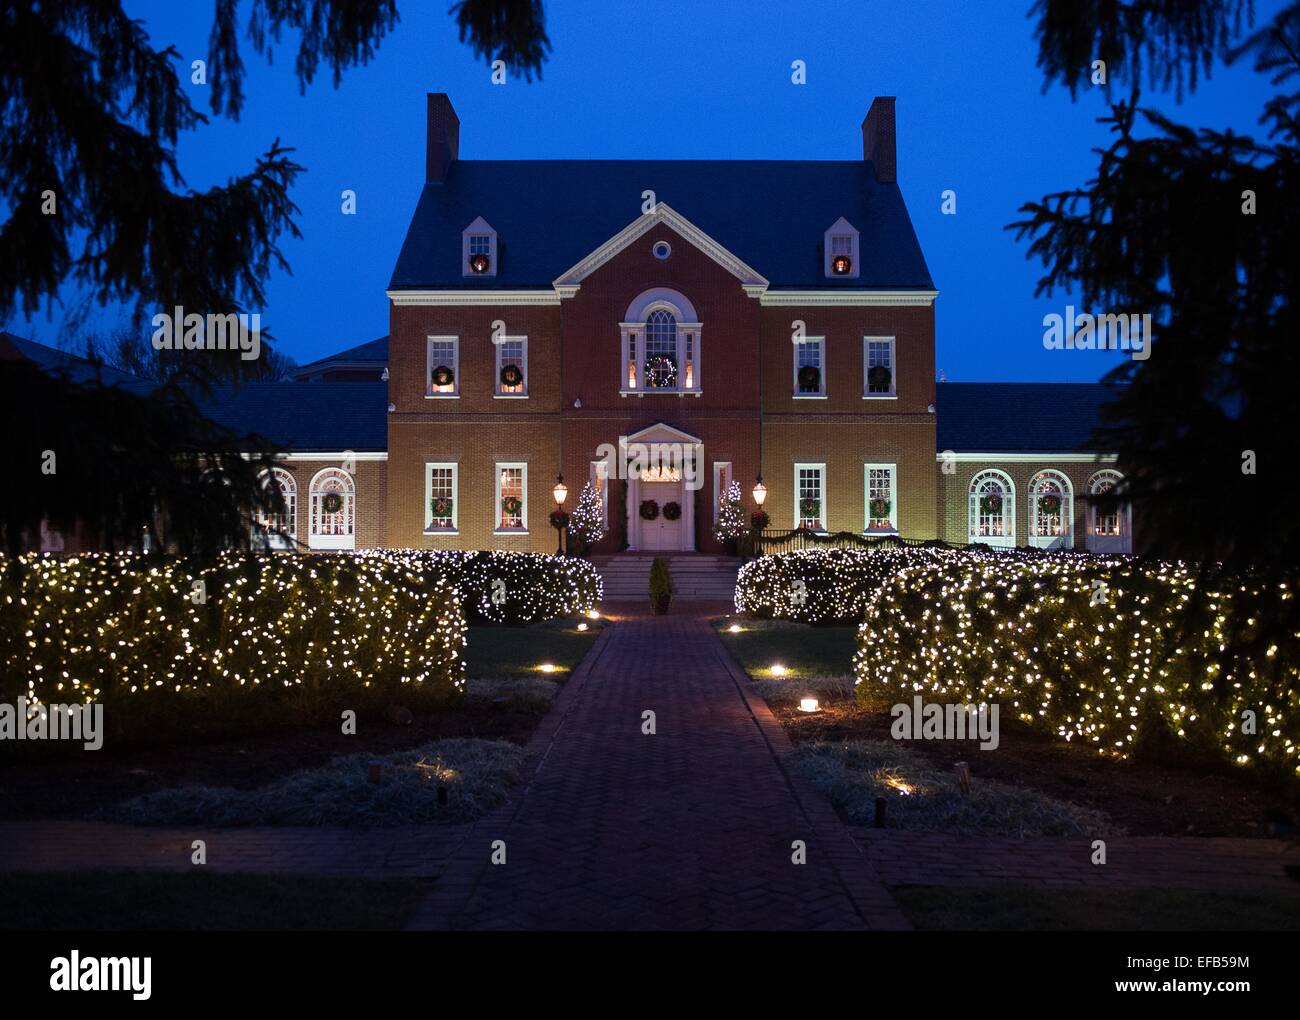 Government House, the Governor of Maryland's residence decorated for Christmas with lights December 11, 2014 in Annapolis, Maryland. Stock Photo